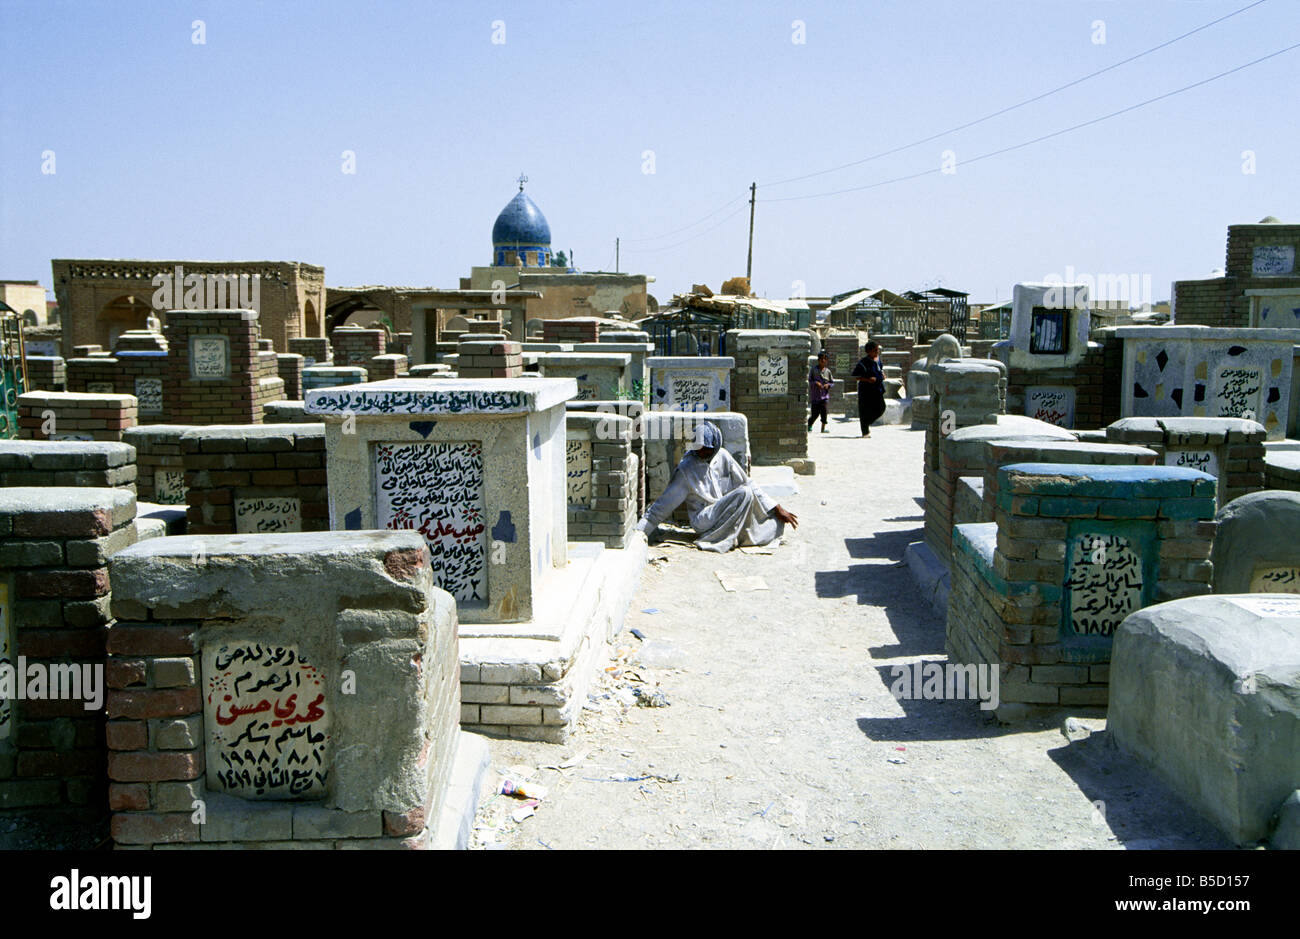 Najaf Iraq Wadi As-Salam Islamic Cemetery Considered By The Shi’ites To Be The Holiest And Most Sort After Place To Be Buried Stock Photo